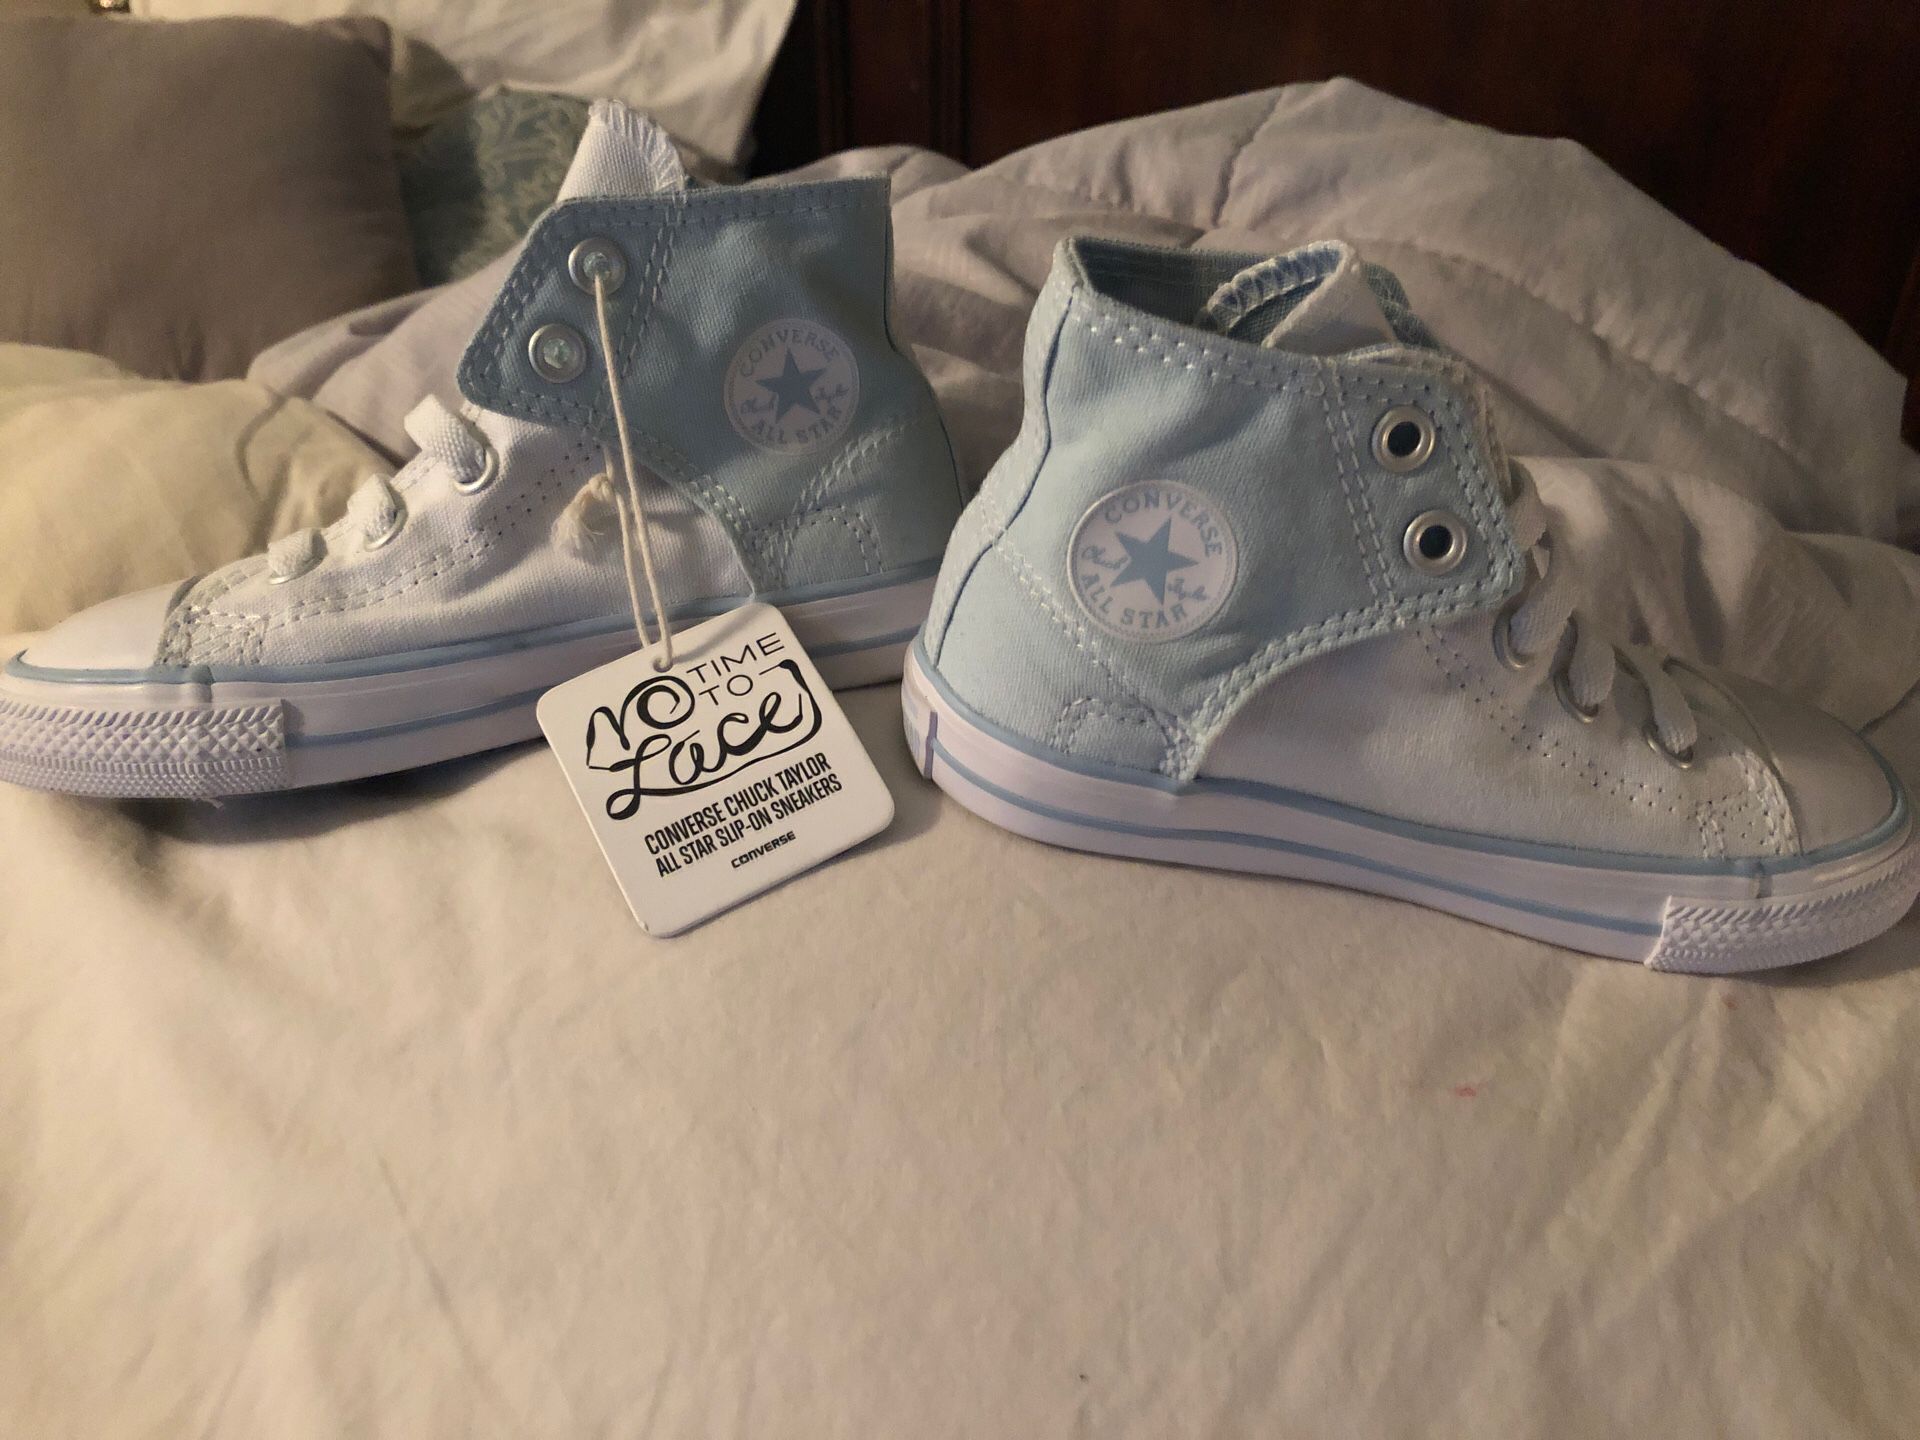 Converse shoes and cloth diaper deal